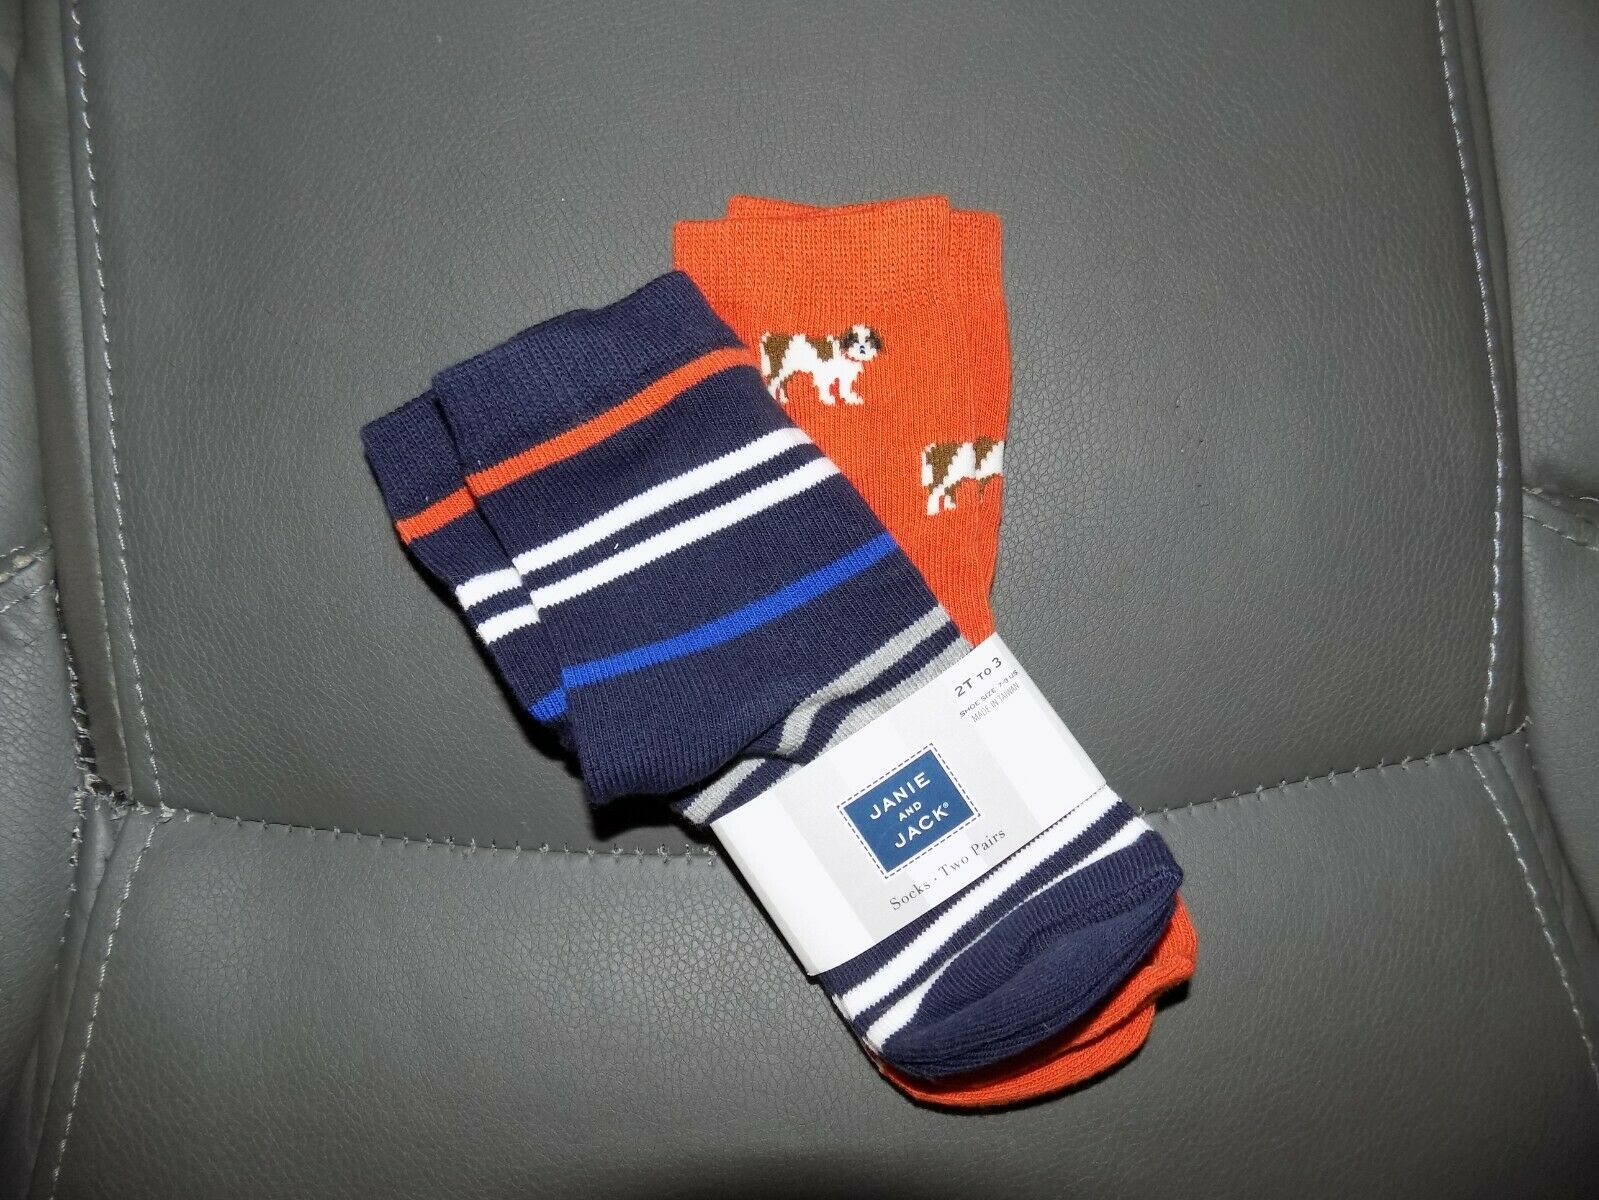 Janie And Jack 2 Pair Of Socks Dogs Orange/navy Blue Striped Size 2t To 3 New